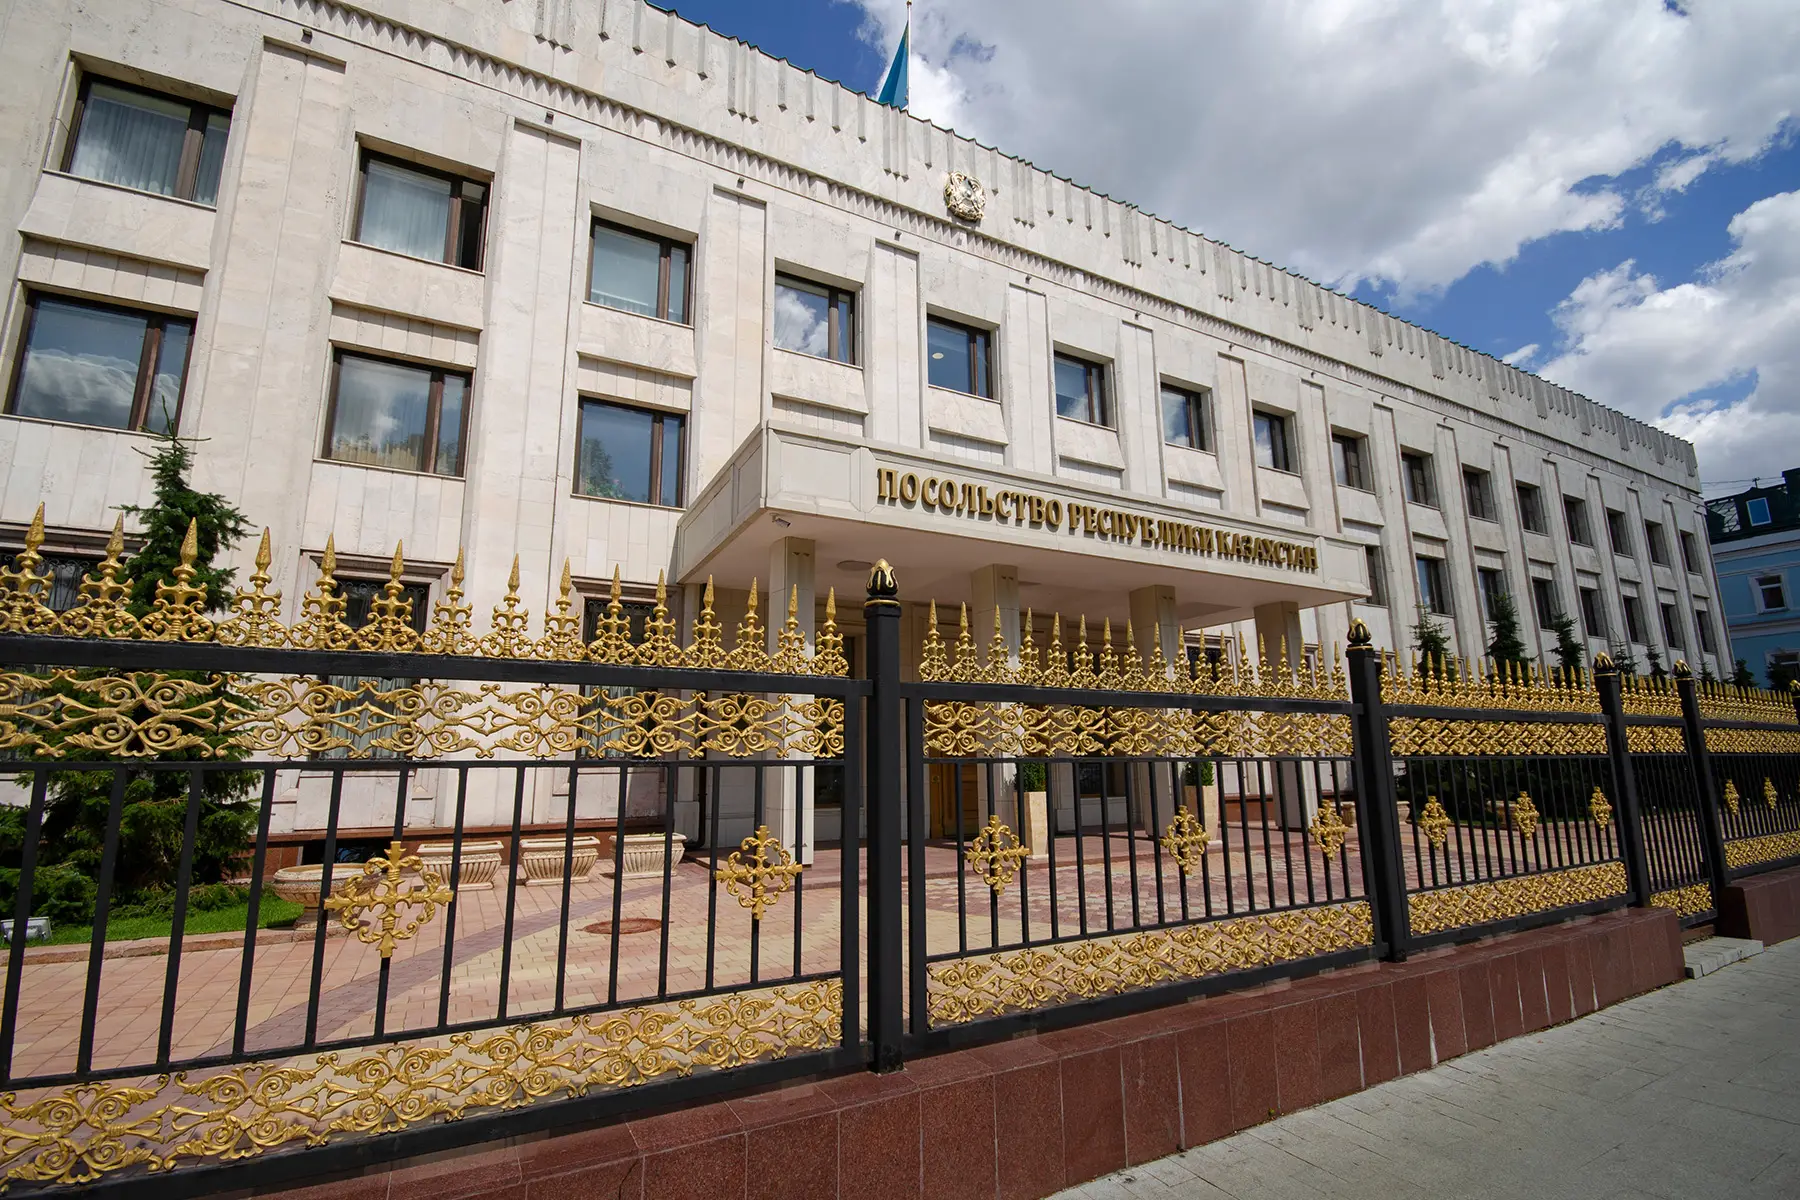 Kazakh Embassy in Moscow, Russia